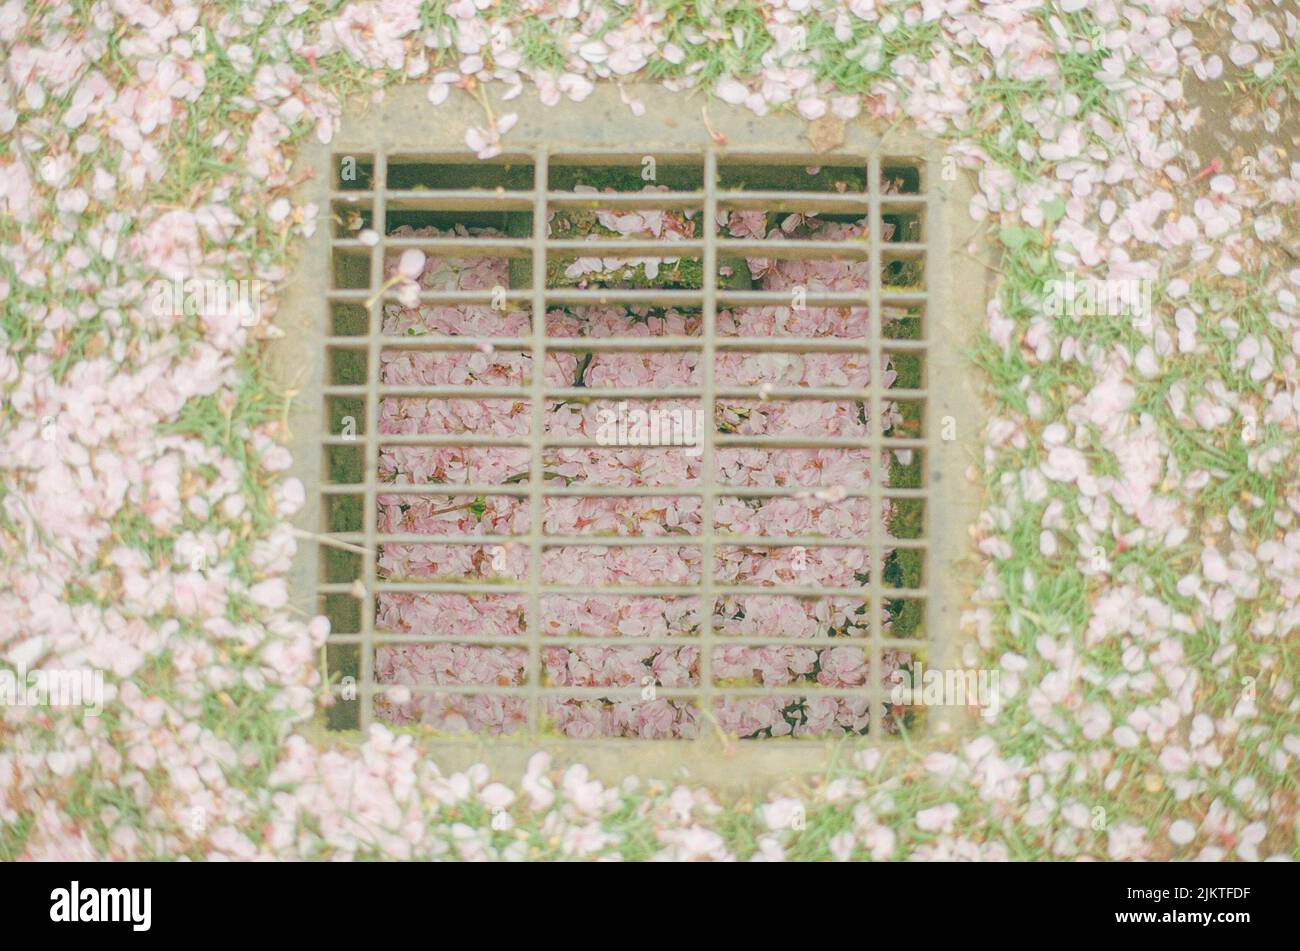 A top view of a drainage with metal grids during cherry blossoms season in University of Washington Stock Photo